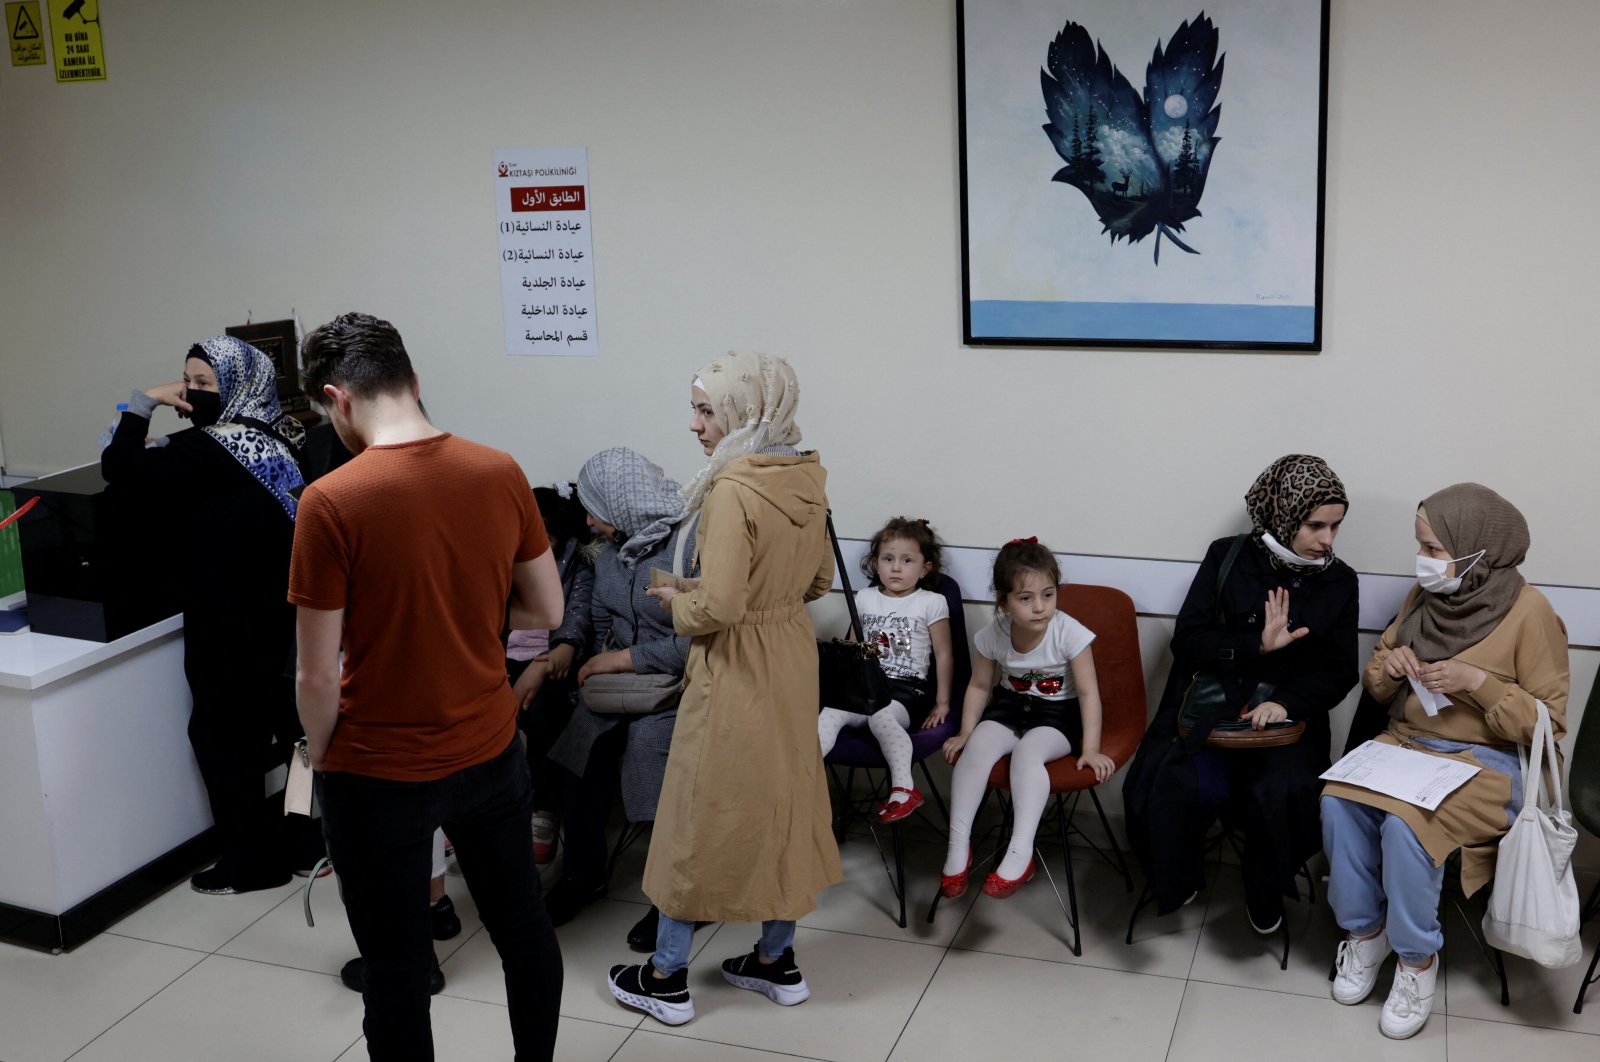 People, mostly Syrians living in Turkey, wait for their medical appointments at a clinic in Istanbul, Turkey, May 11, 2022. (REUTERS)